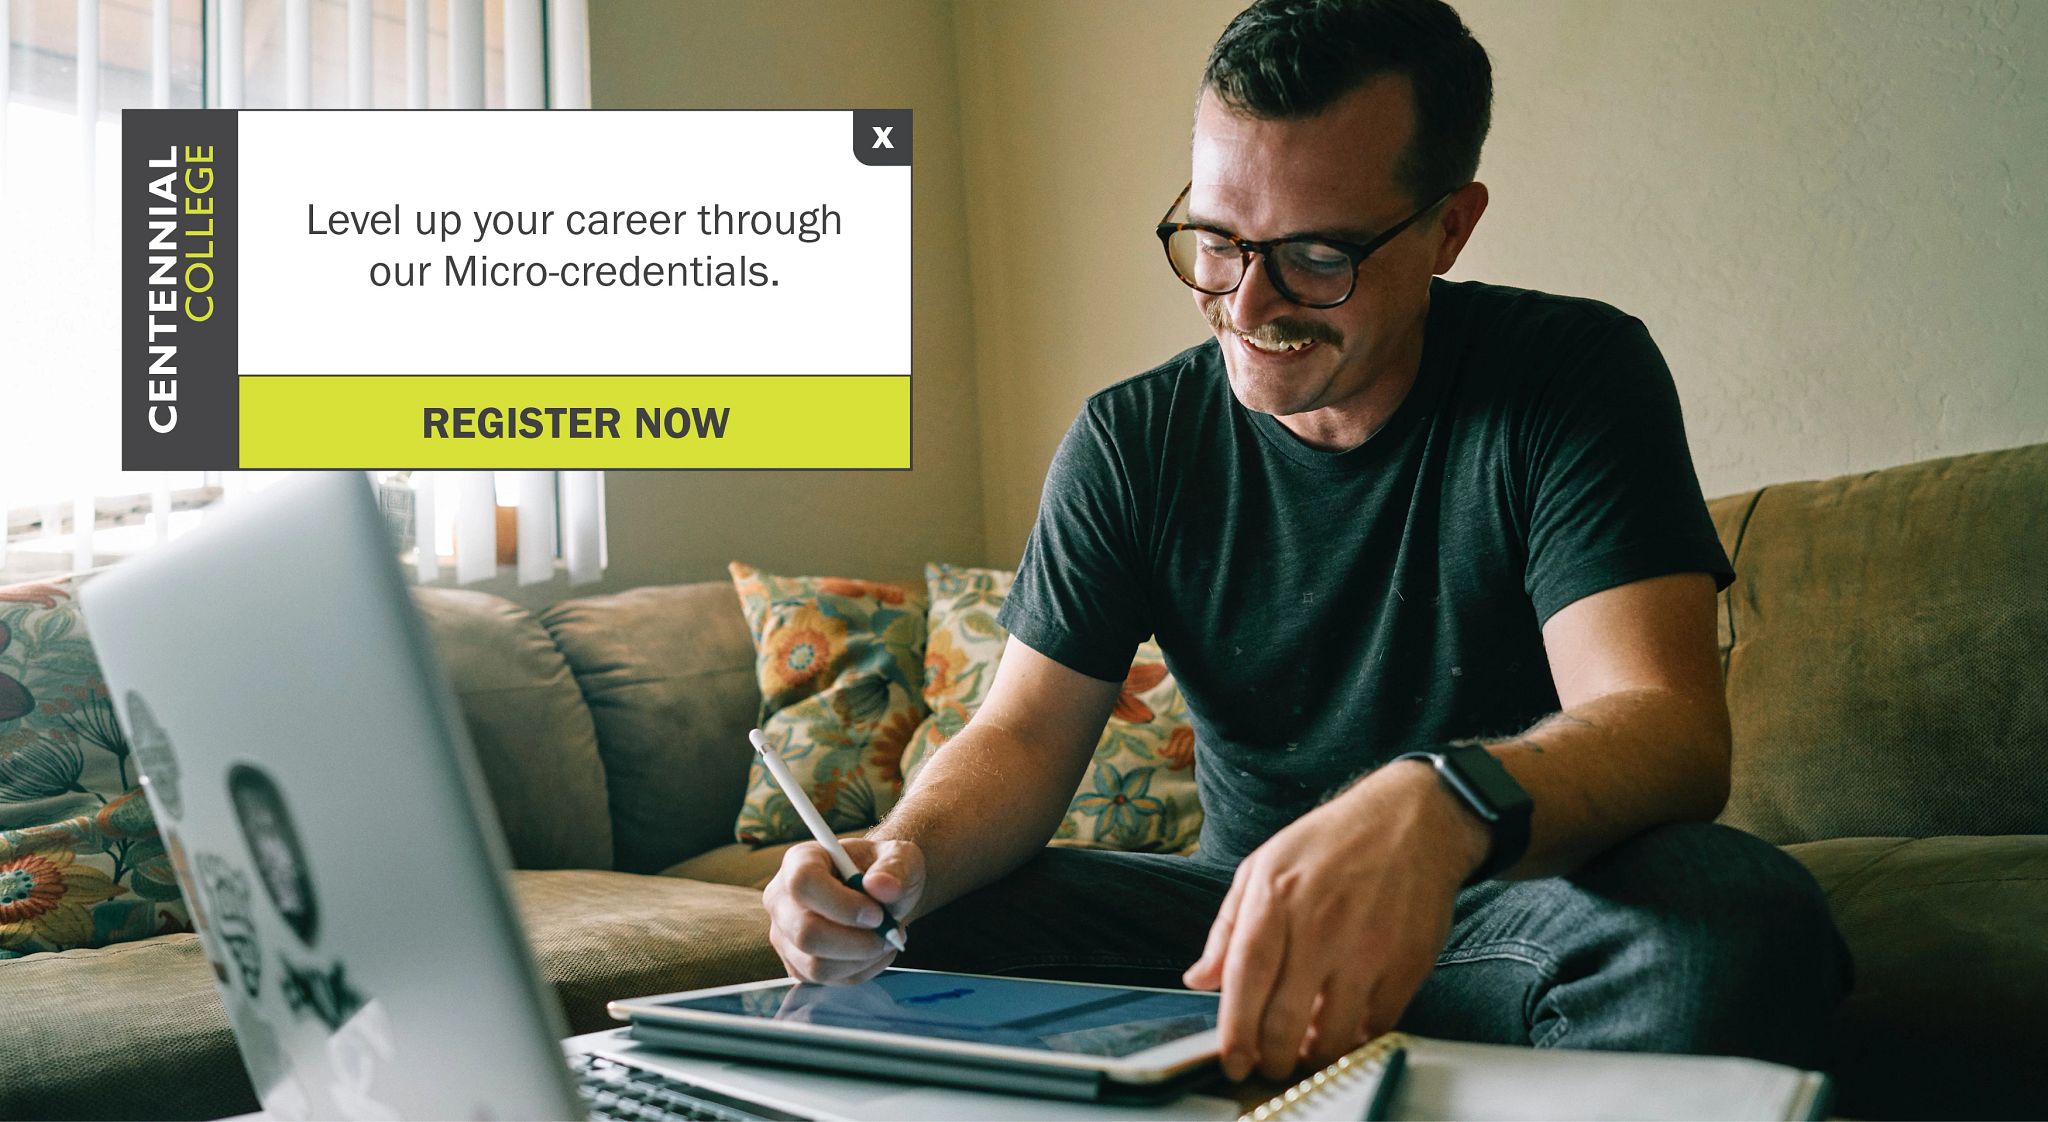 Focus on in advancing your career through our micro-credentials. Register Now.